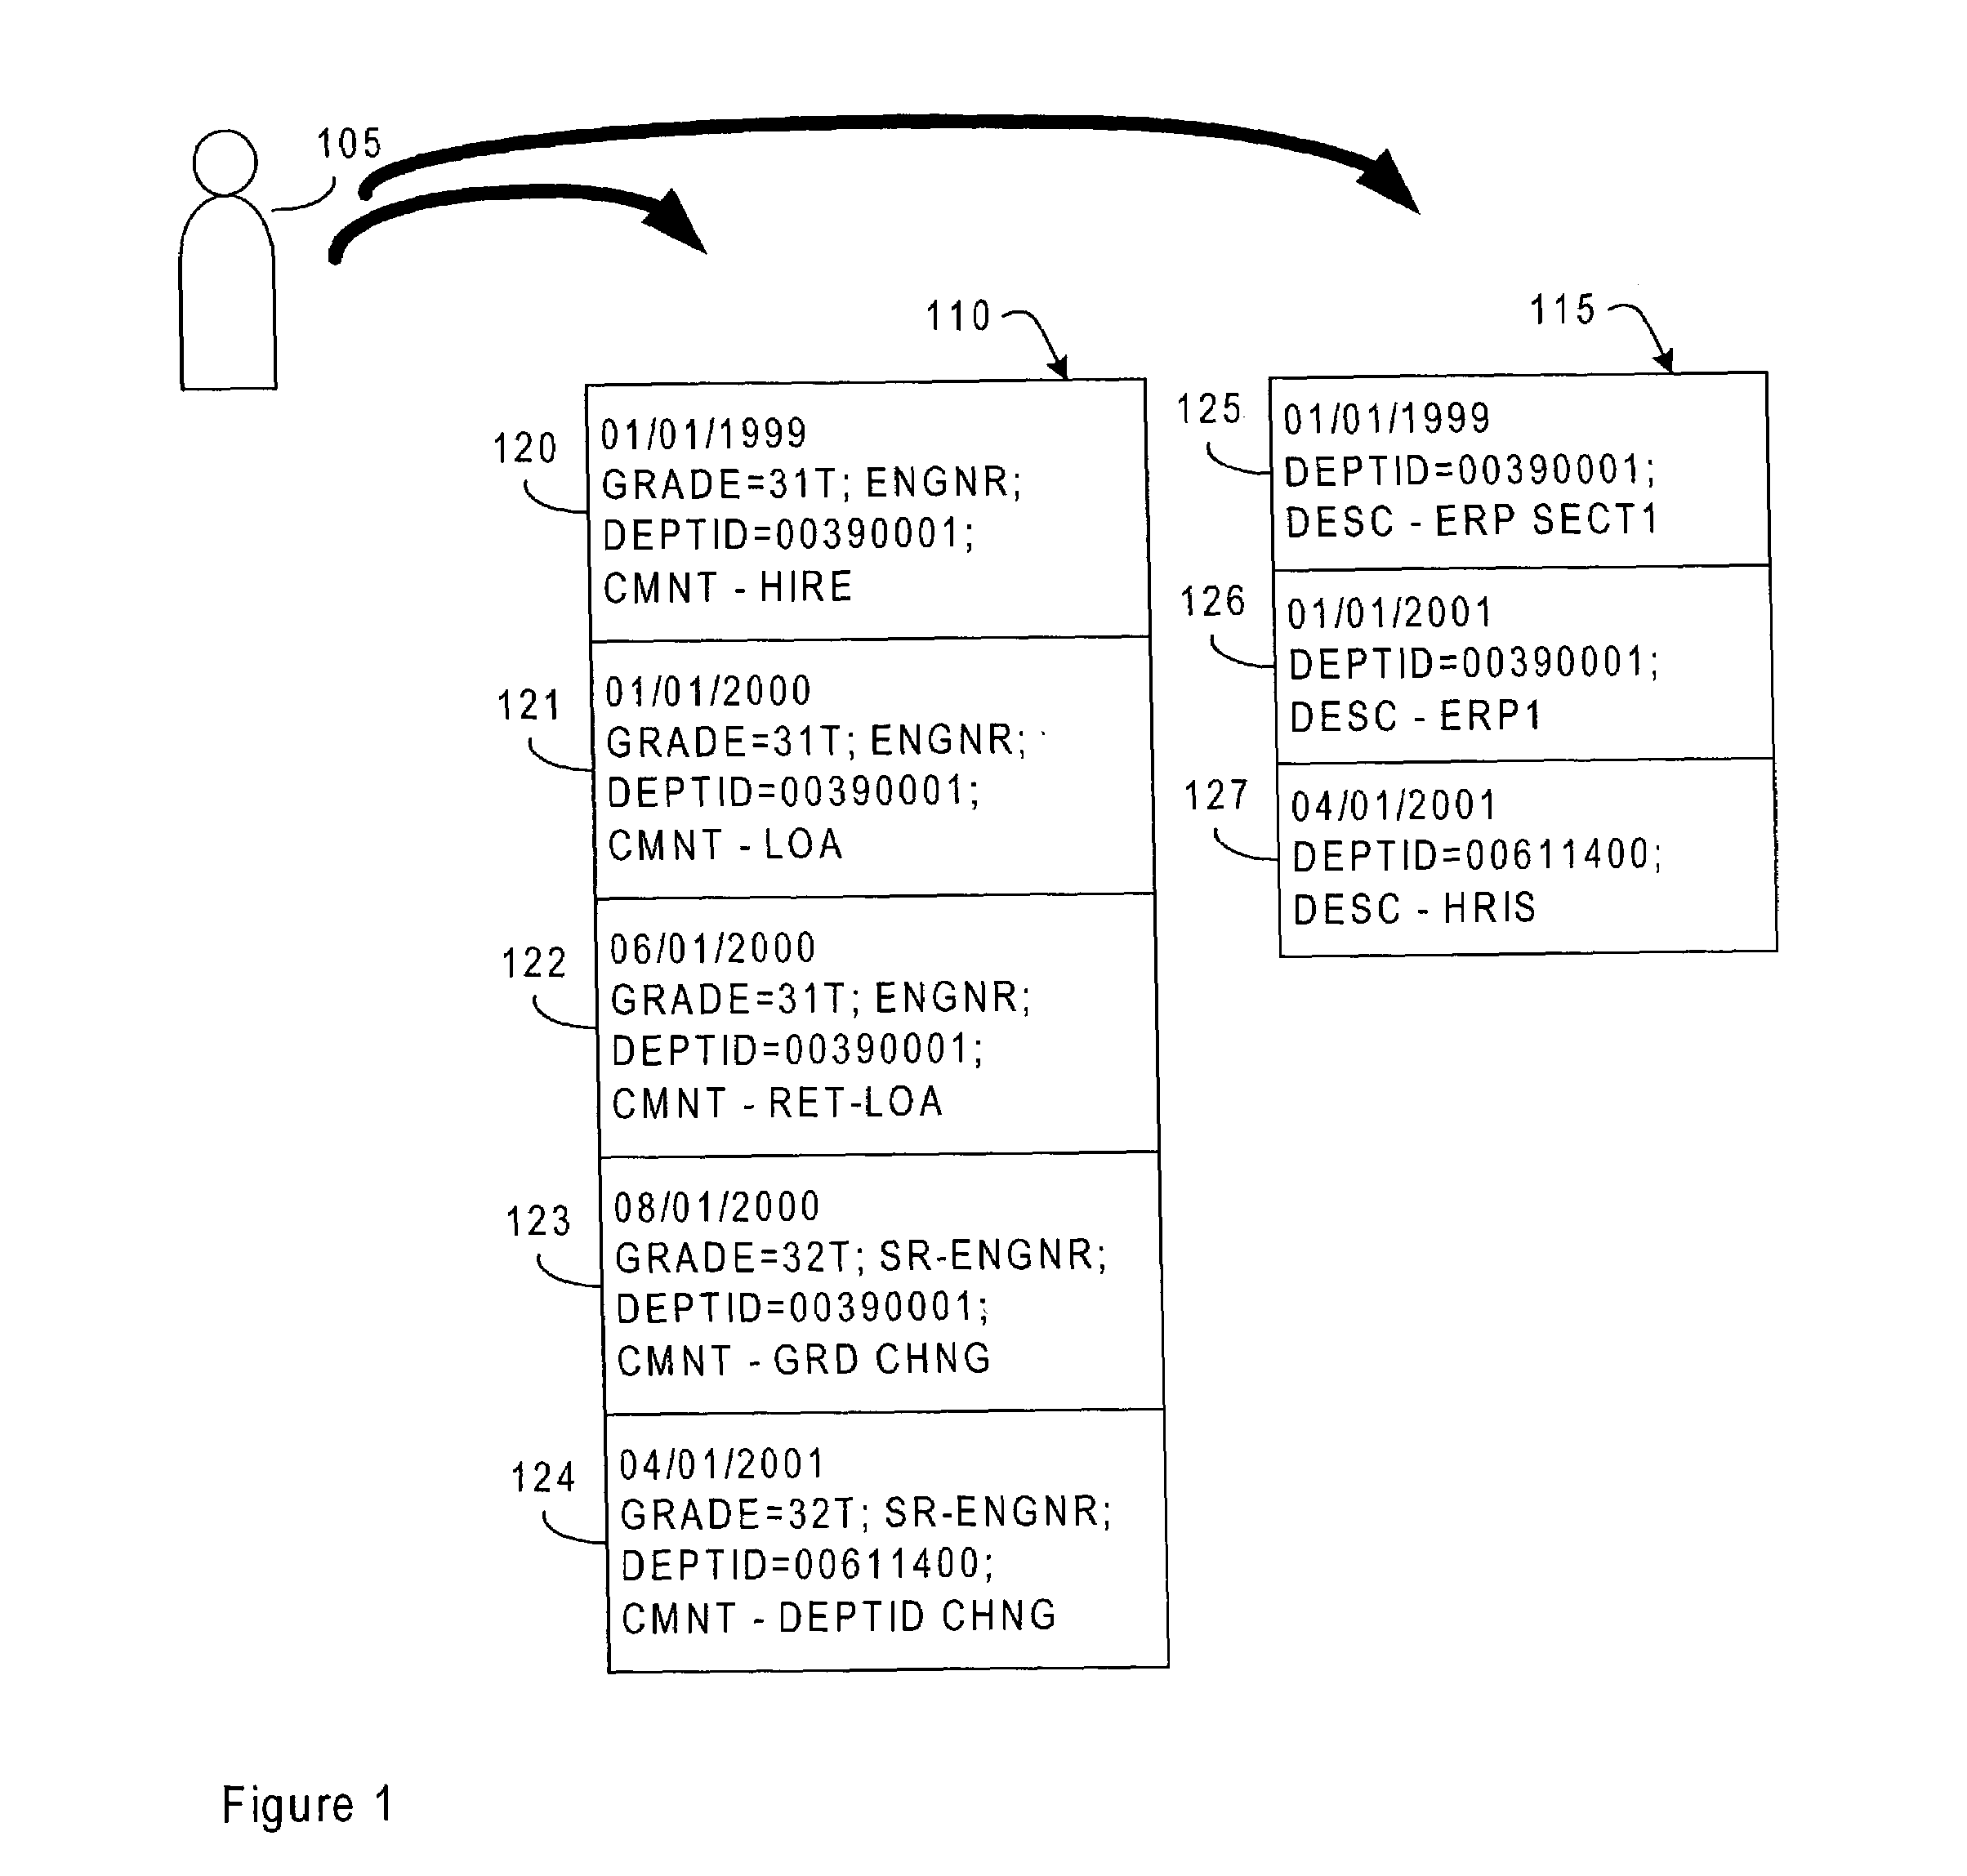 Method for merging information from effective dated base tables